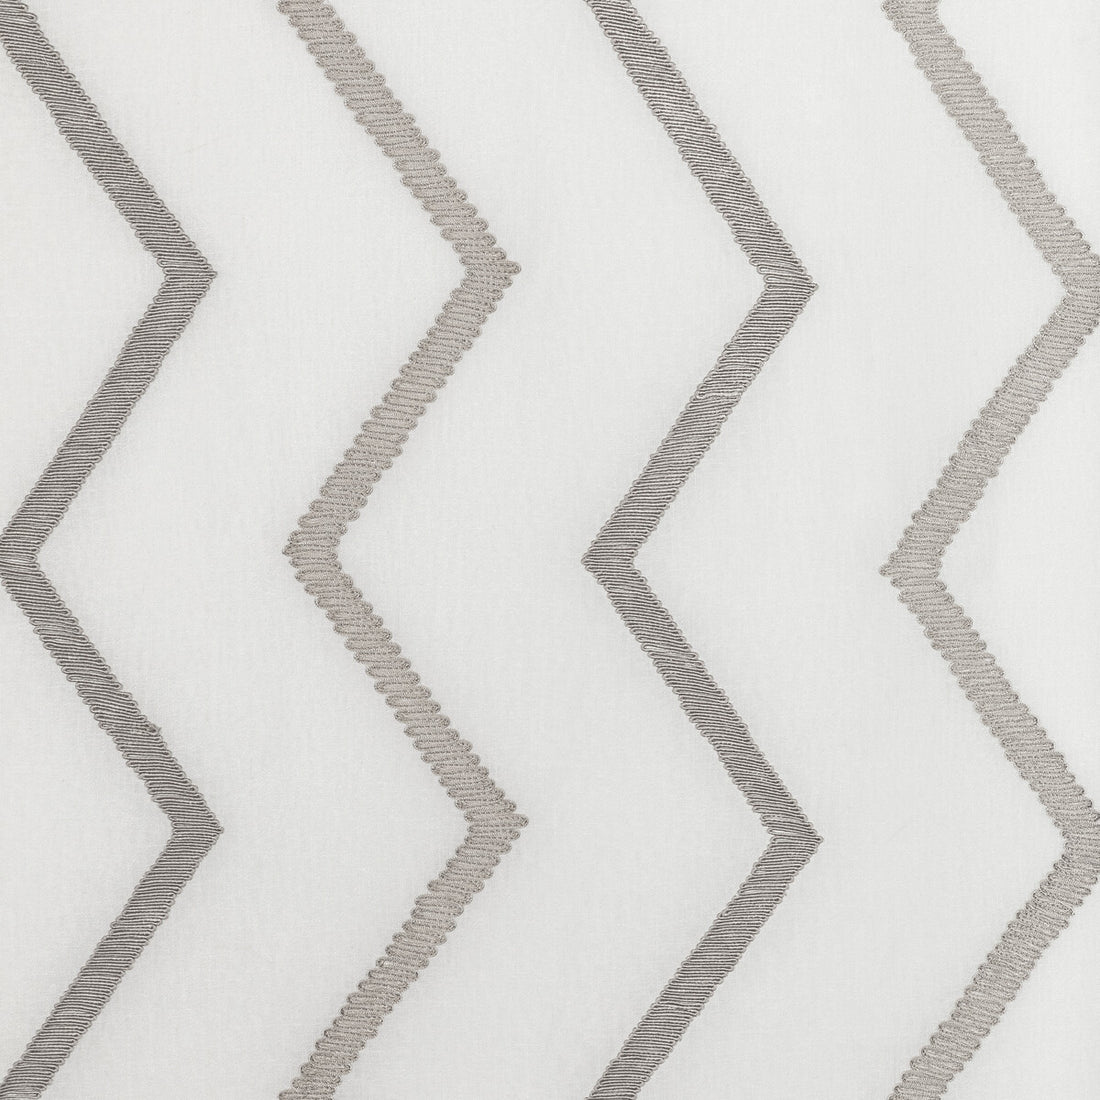 Ribbon Point fabric in platinum color - pattern 4891.11.0 - by Kravet Couture in the Modern Luxe III collection